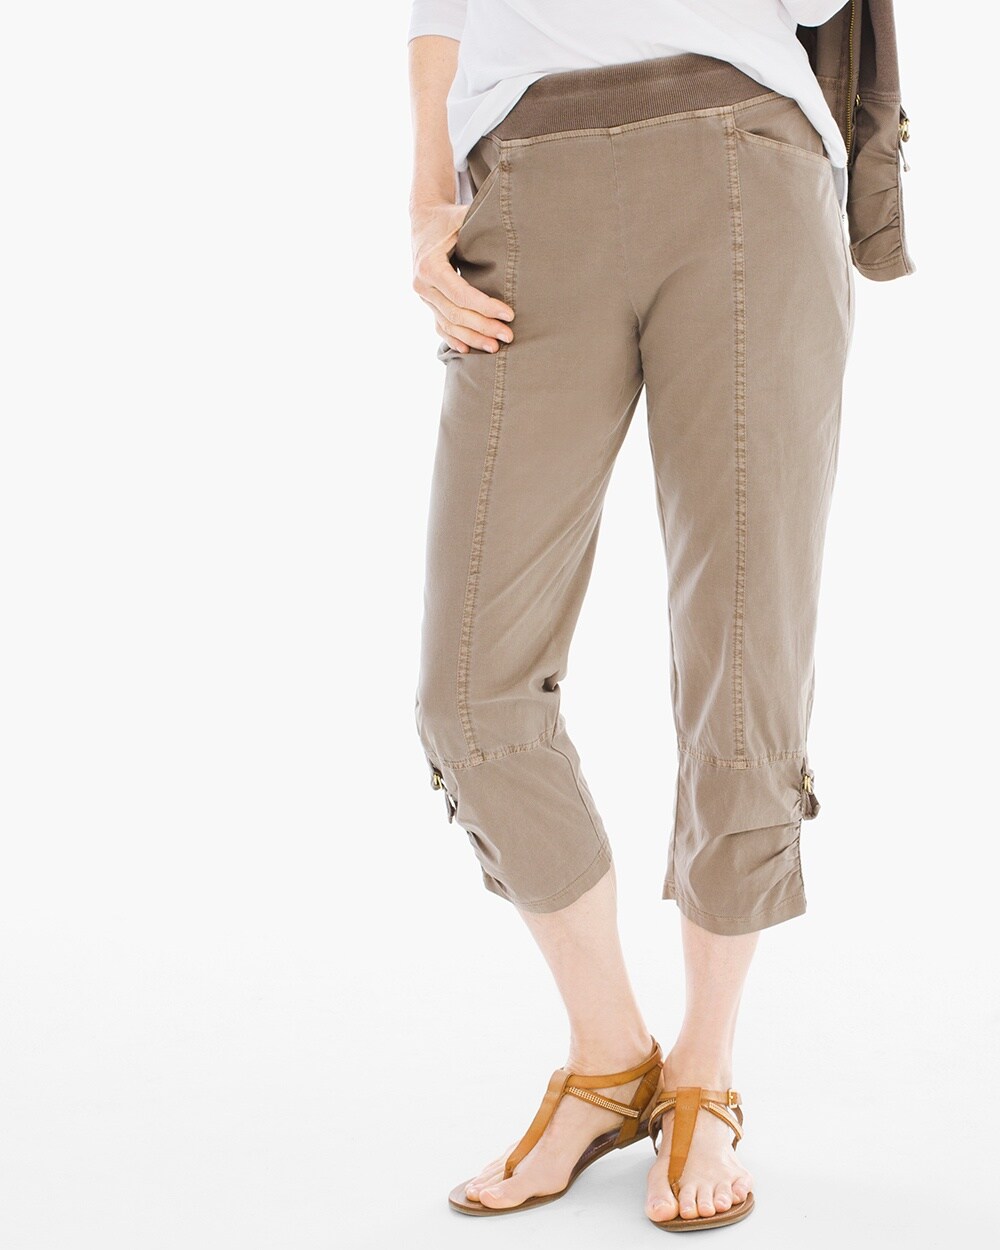 Zenergy Woven Collection Washed Crop Pants